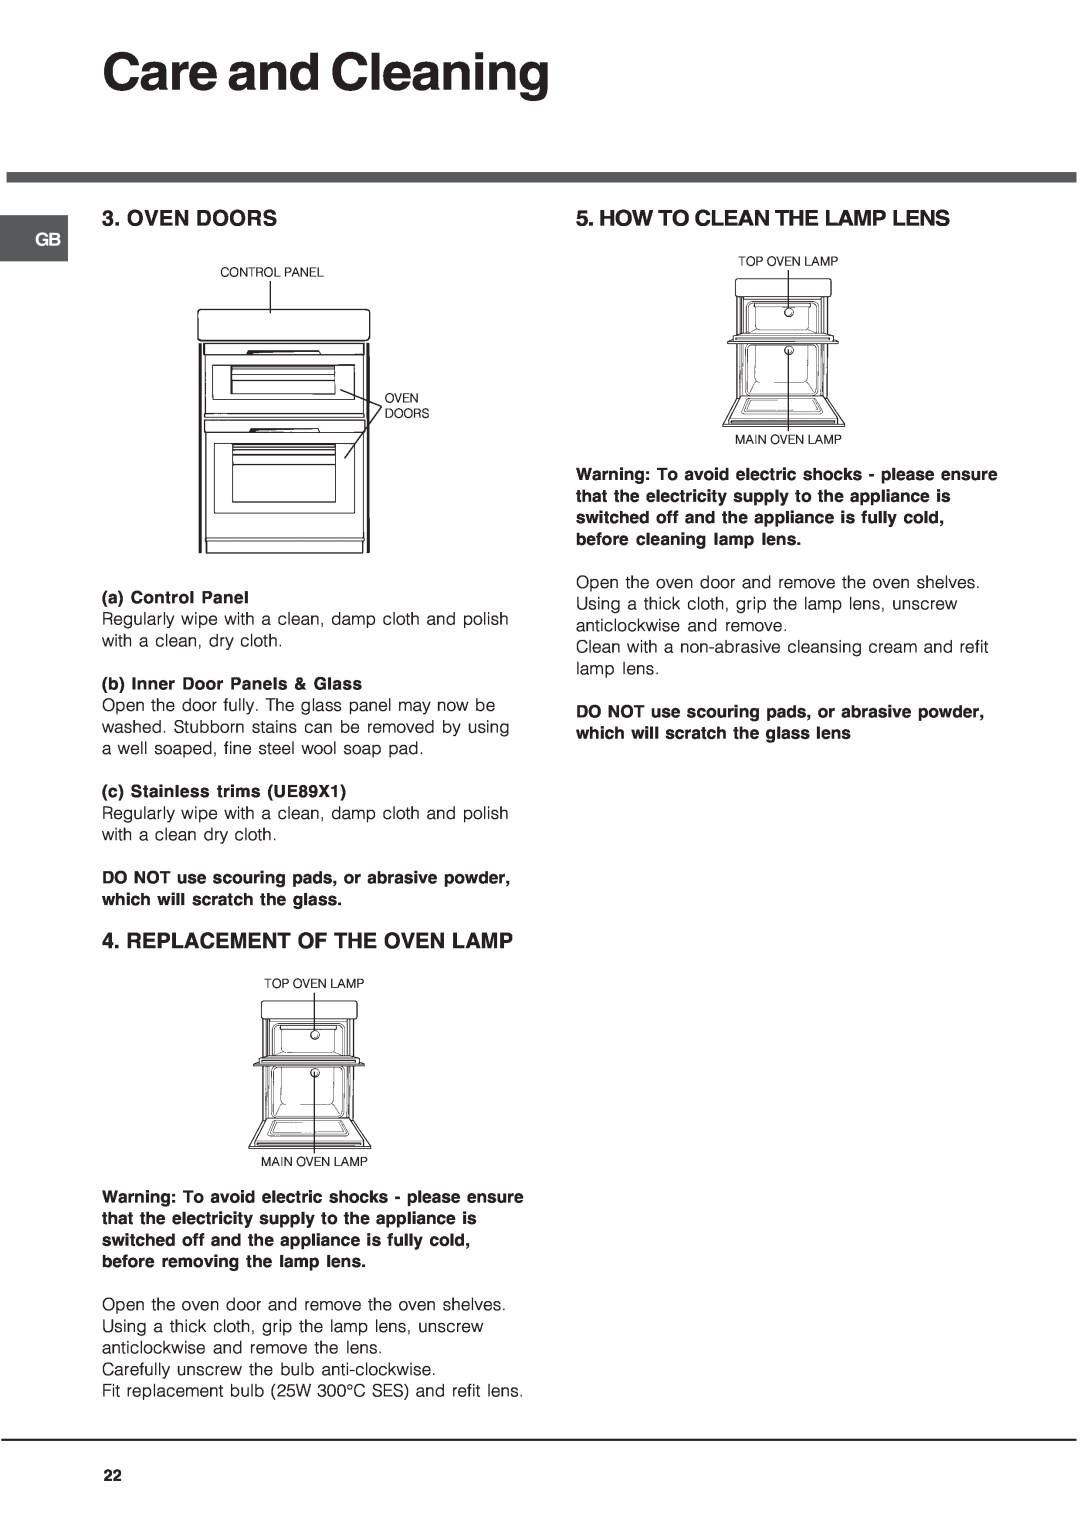 Hotpoint UQ89I1, UE89X manual Care and Cleaning, Oven Doors, Replacement Of The Oven Lamp, How To Clean The Lamp Lens 